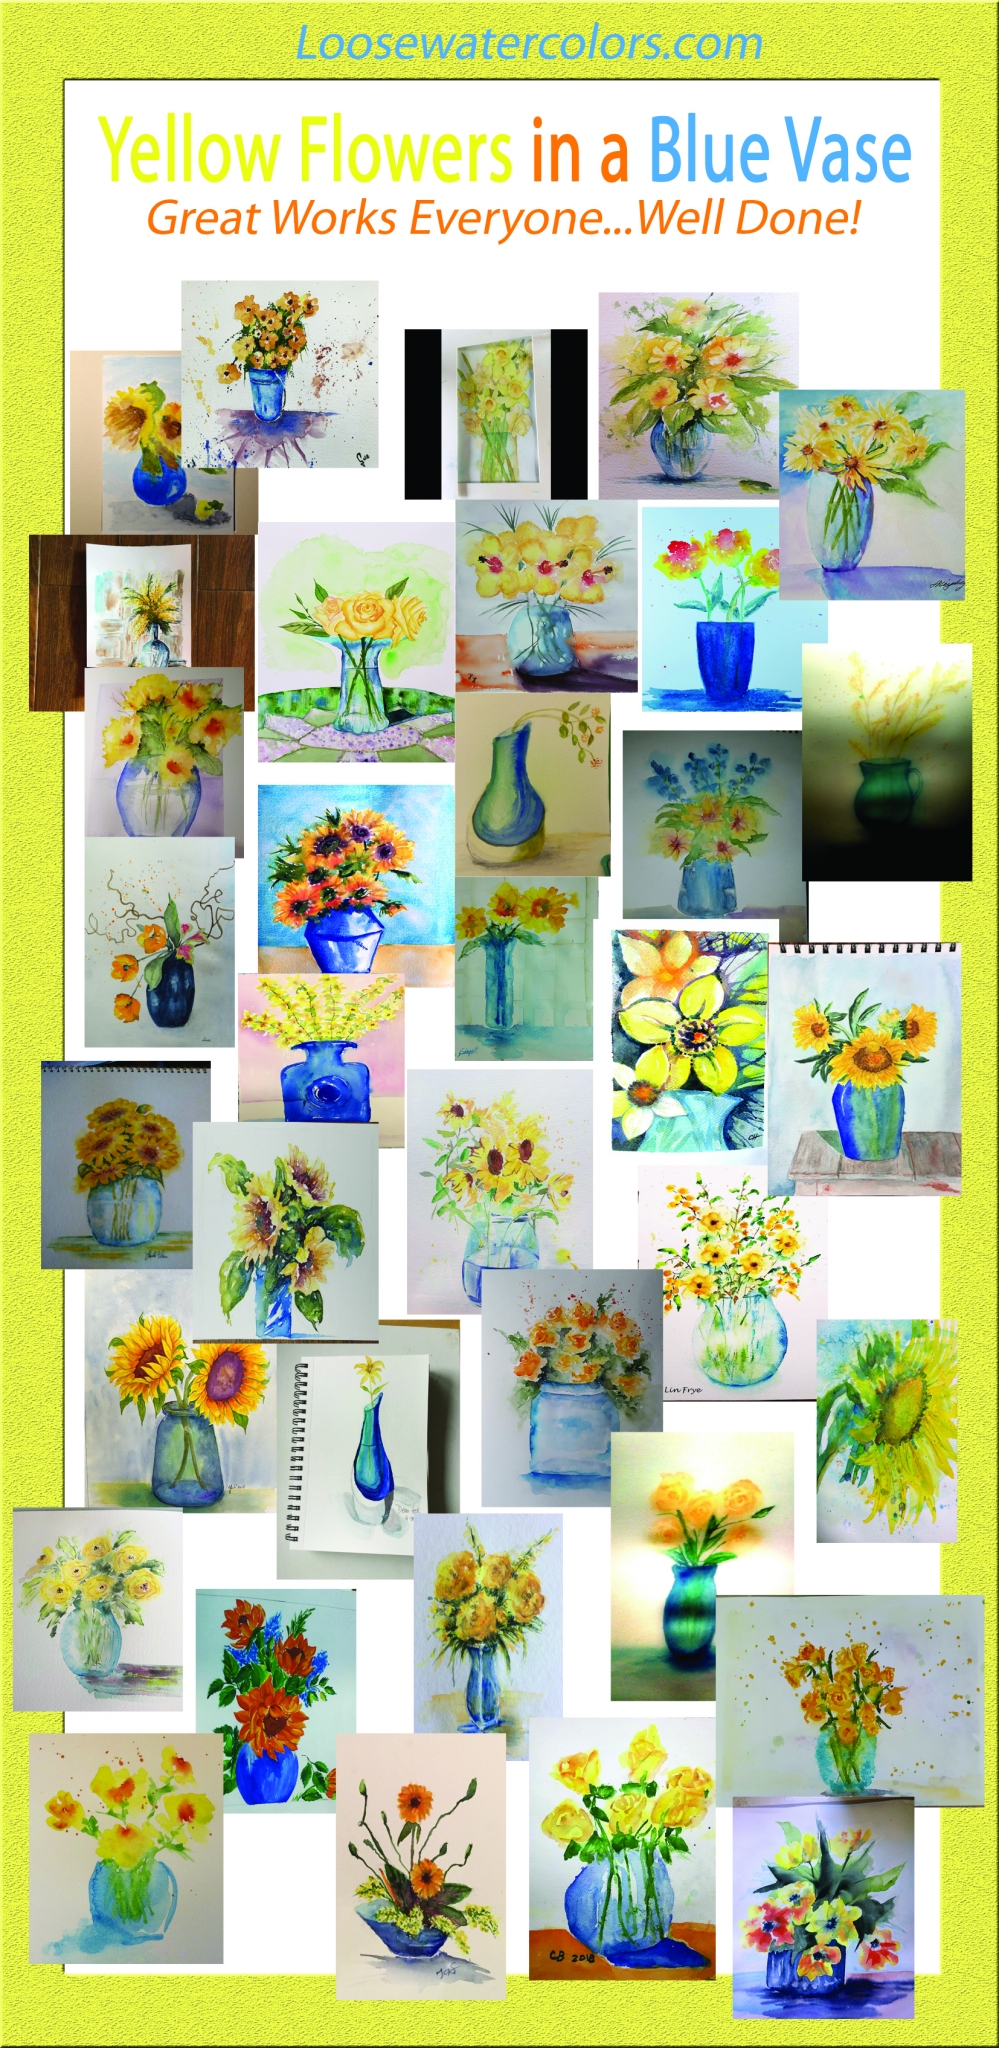 Yellow Flowers in a Blue Vase